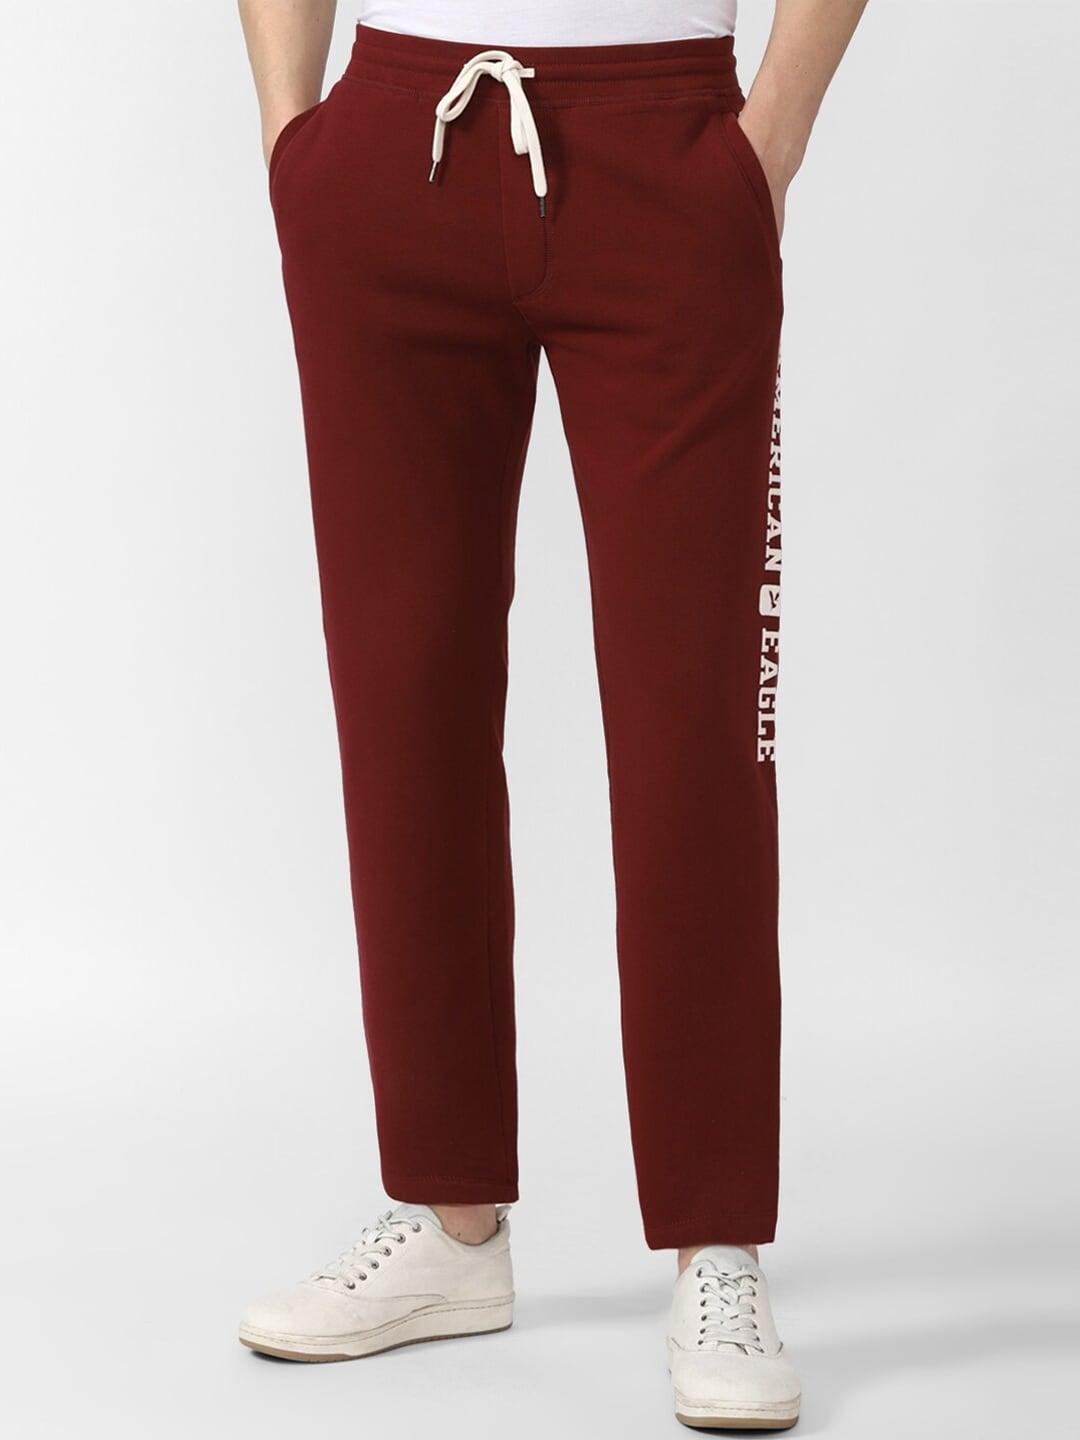 AMERICAN EAGLE OUTFITTERS Men Burgundy Typography Printed Track Pants